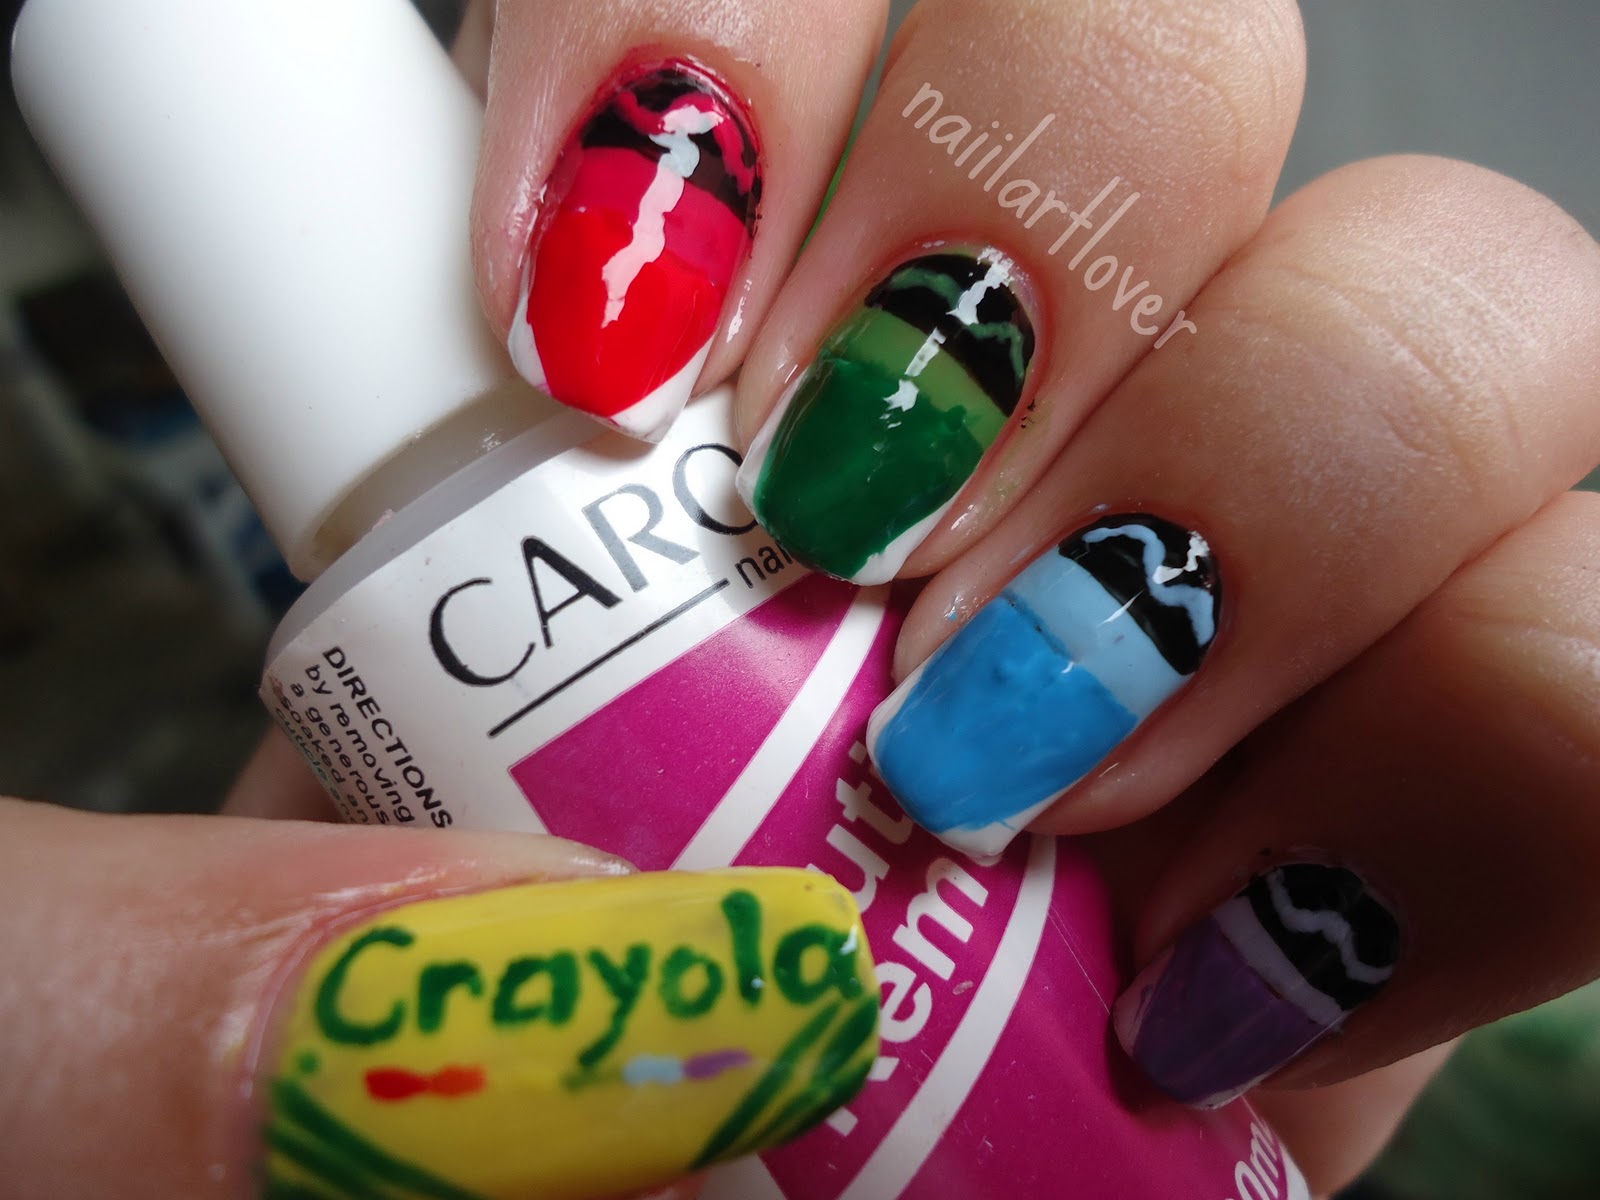 icecreamlover's nail blog: Day 21 – Inspired by a Color